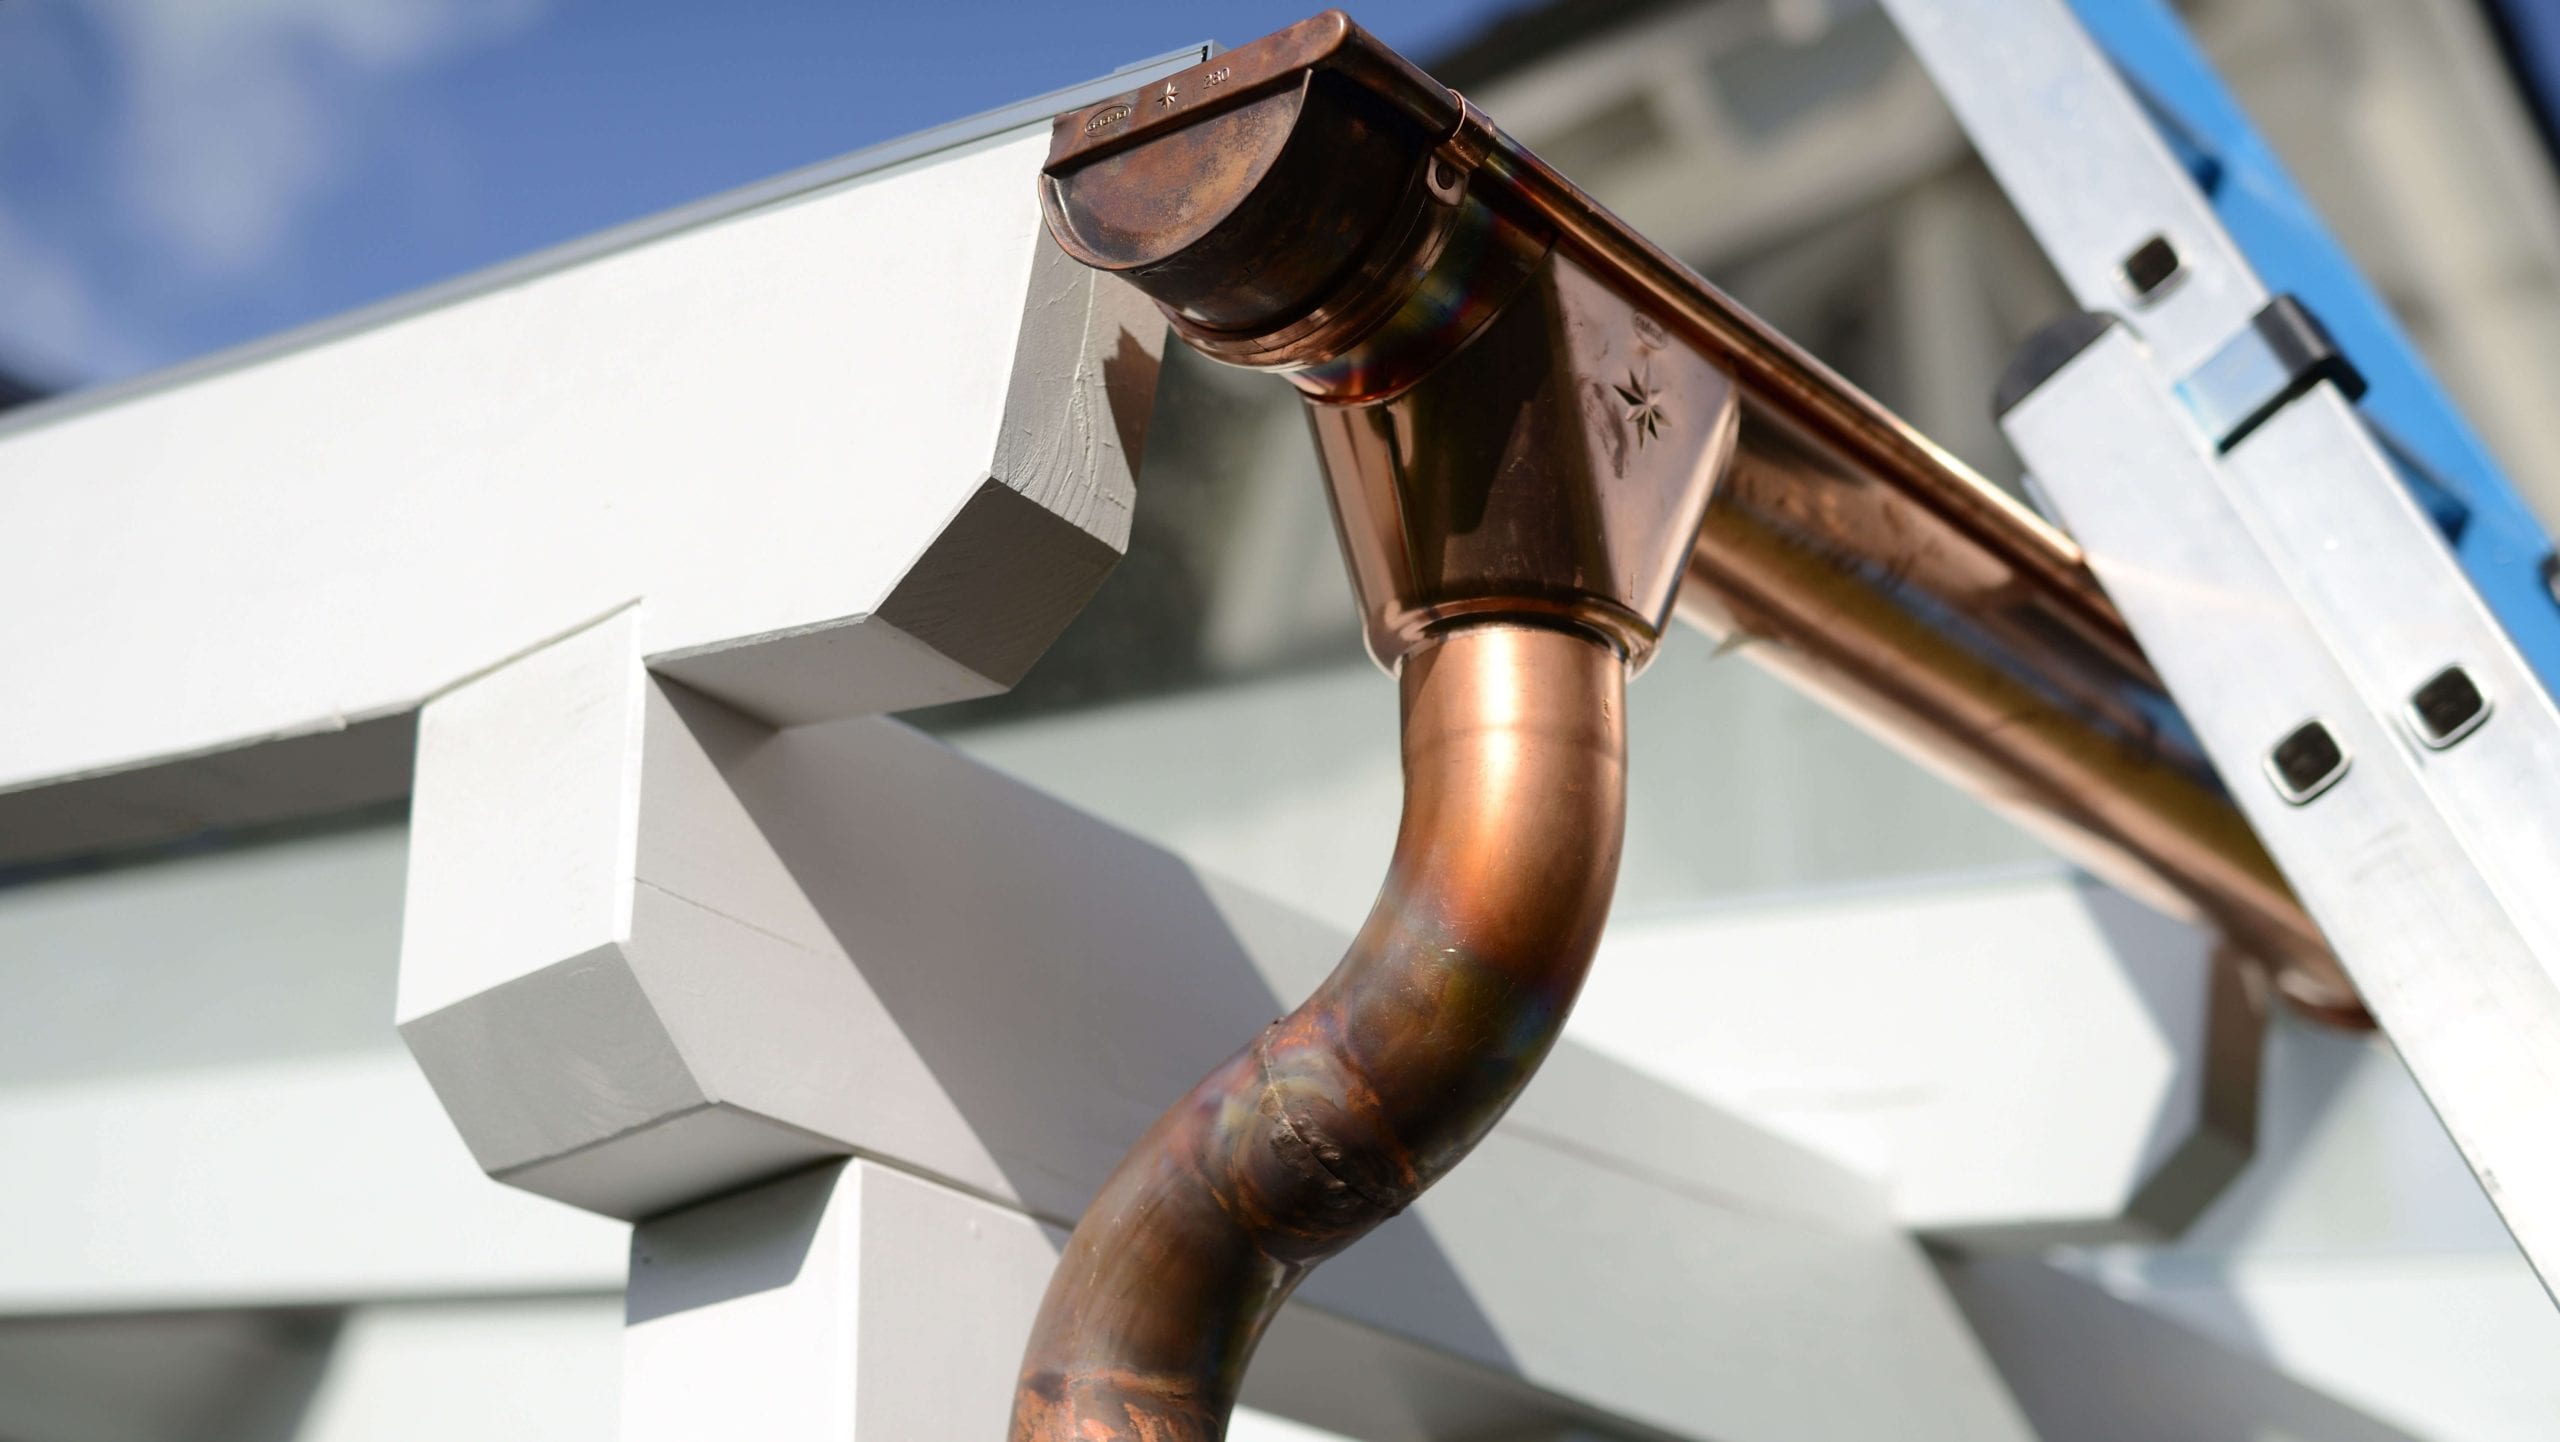 Make your property stand out with copper gutters. Contact for gutter installation in Acworth